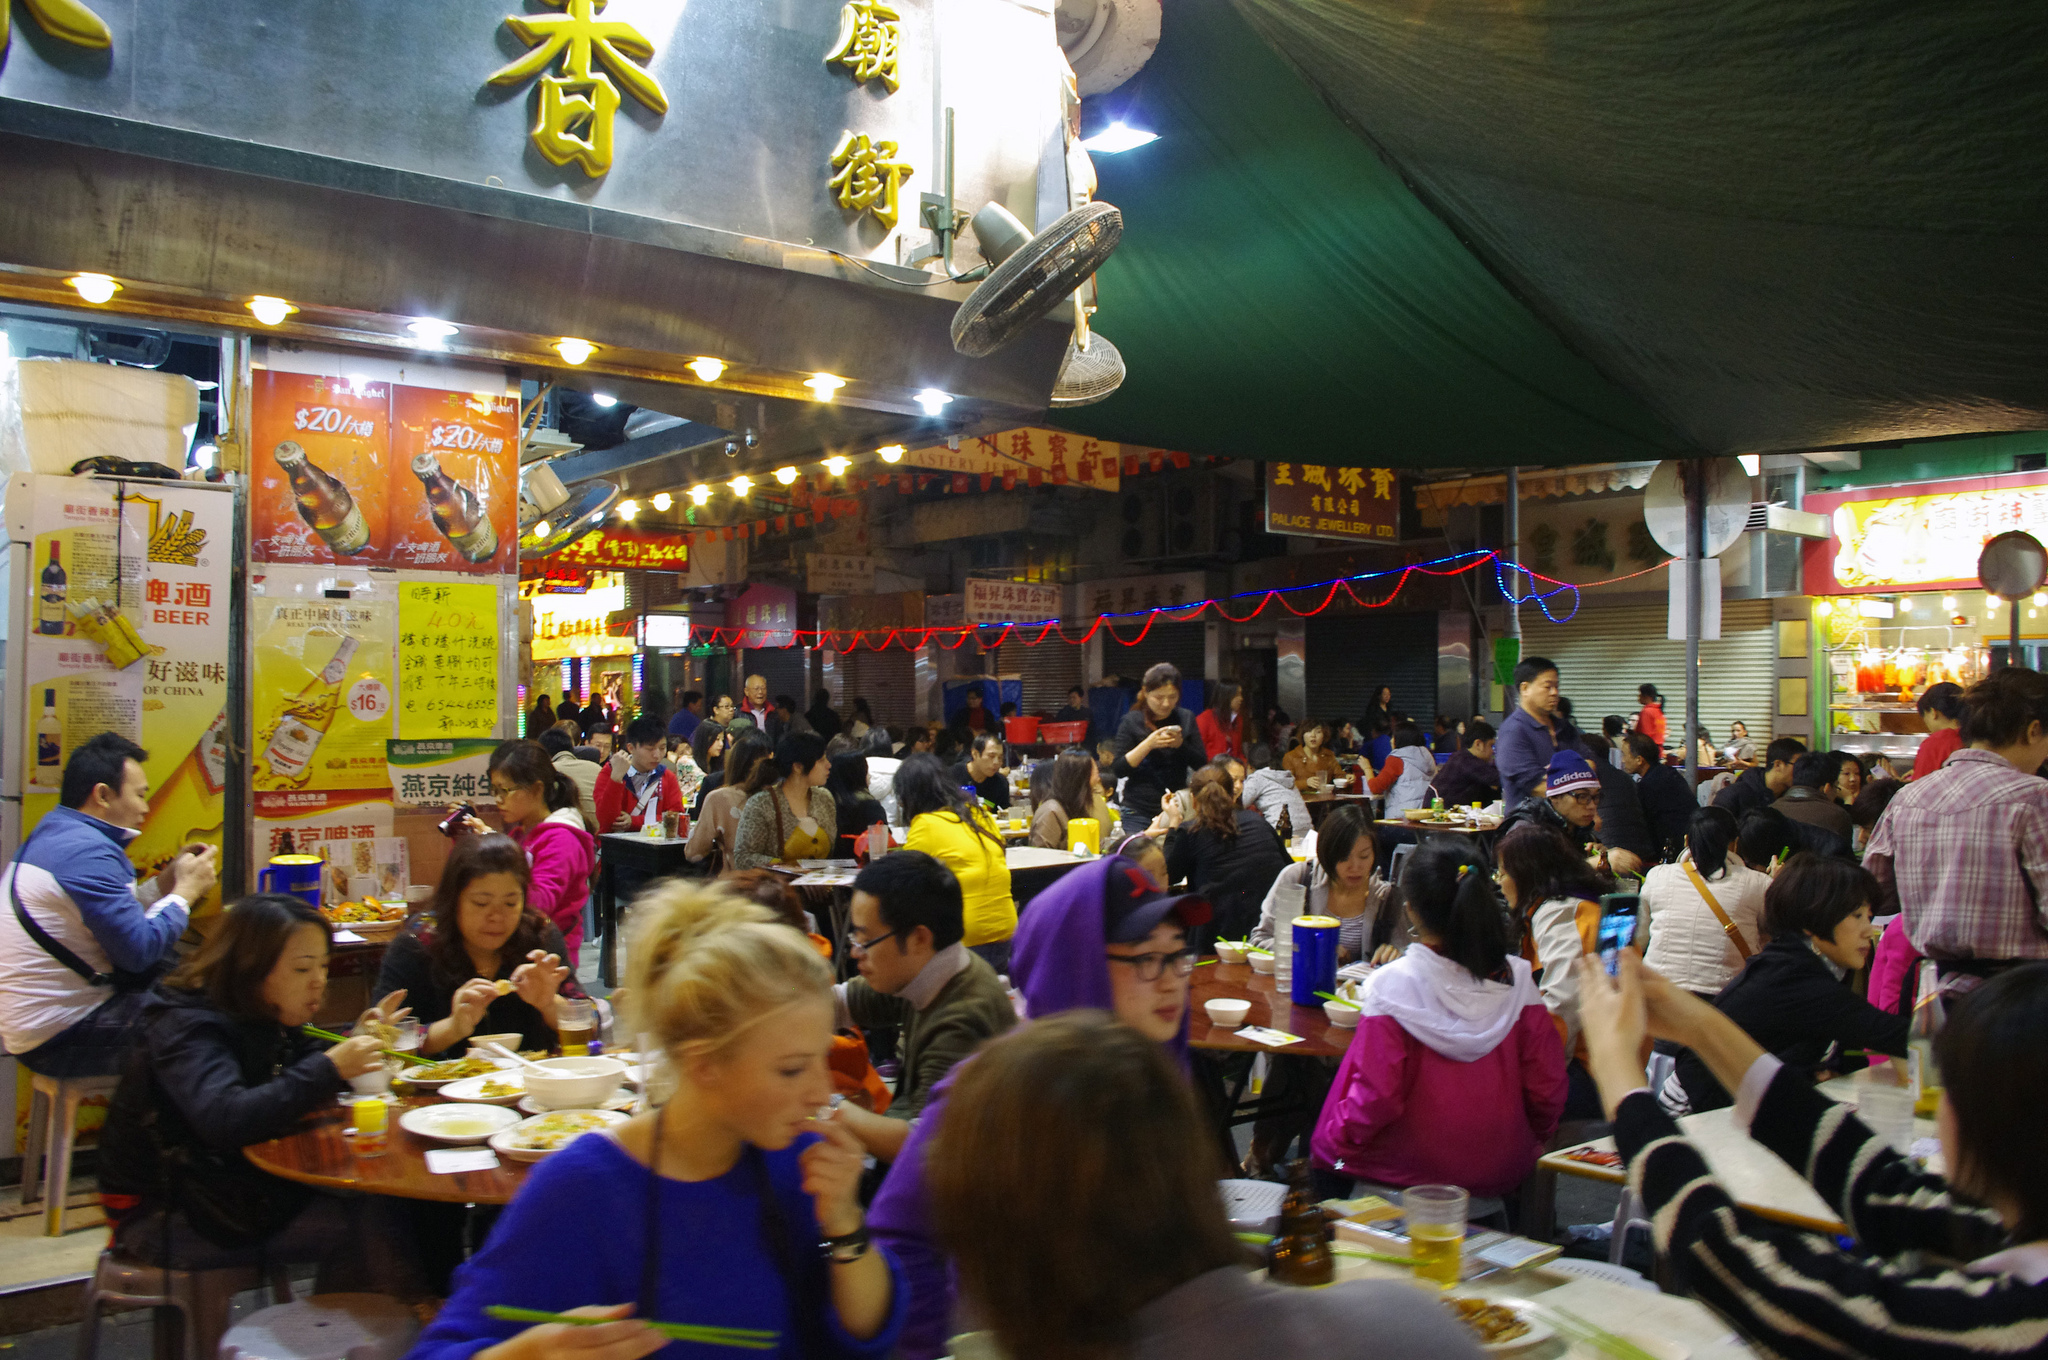 Temple Street Market dai pai dong's in Hong Kong. Photo by alphacityguides.